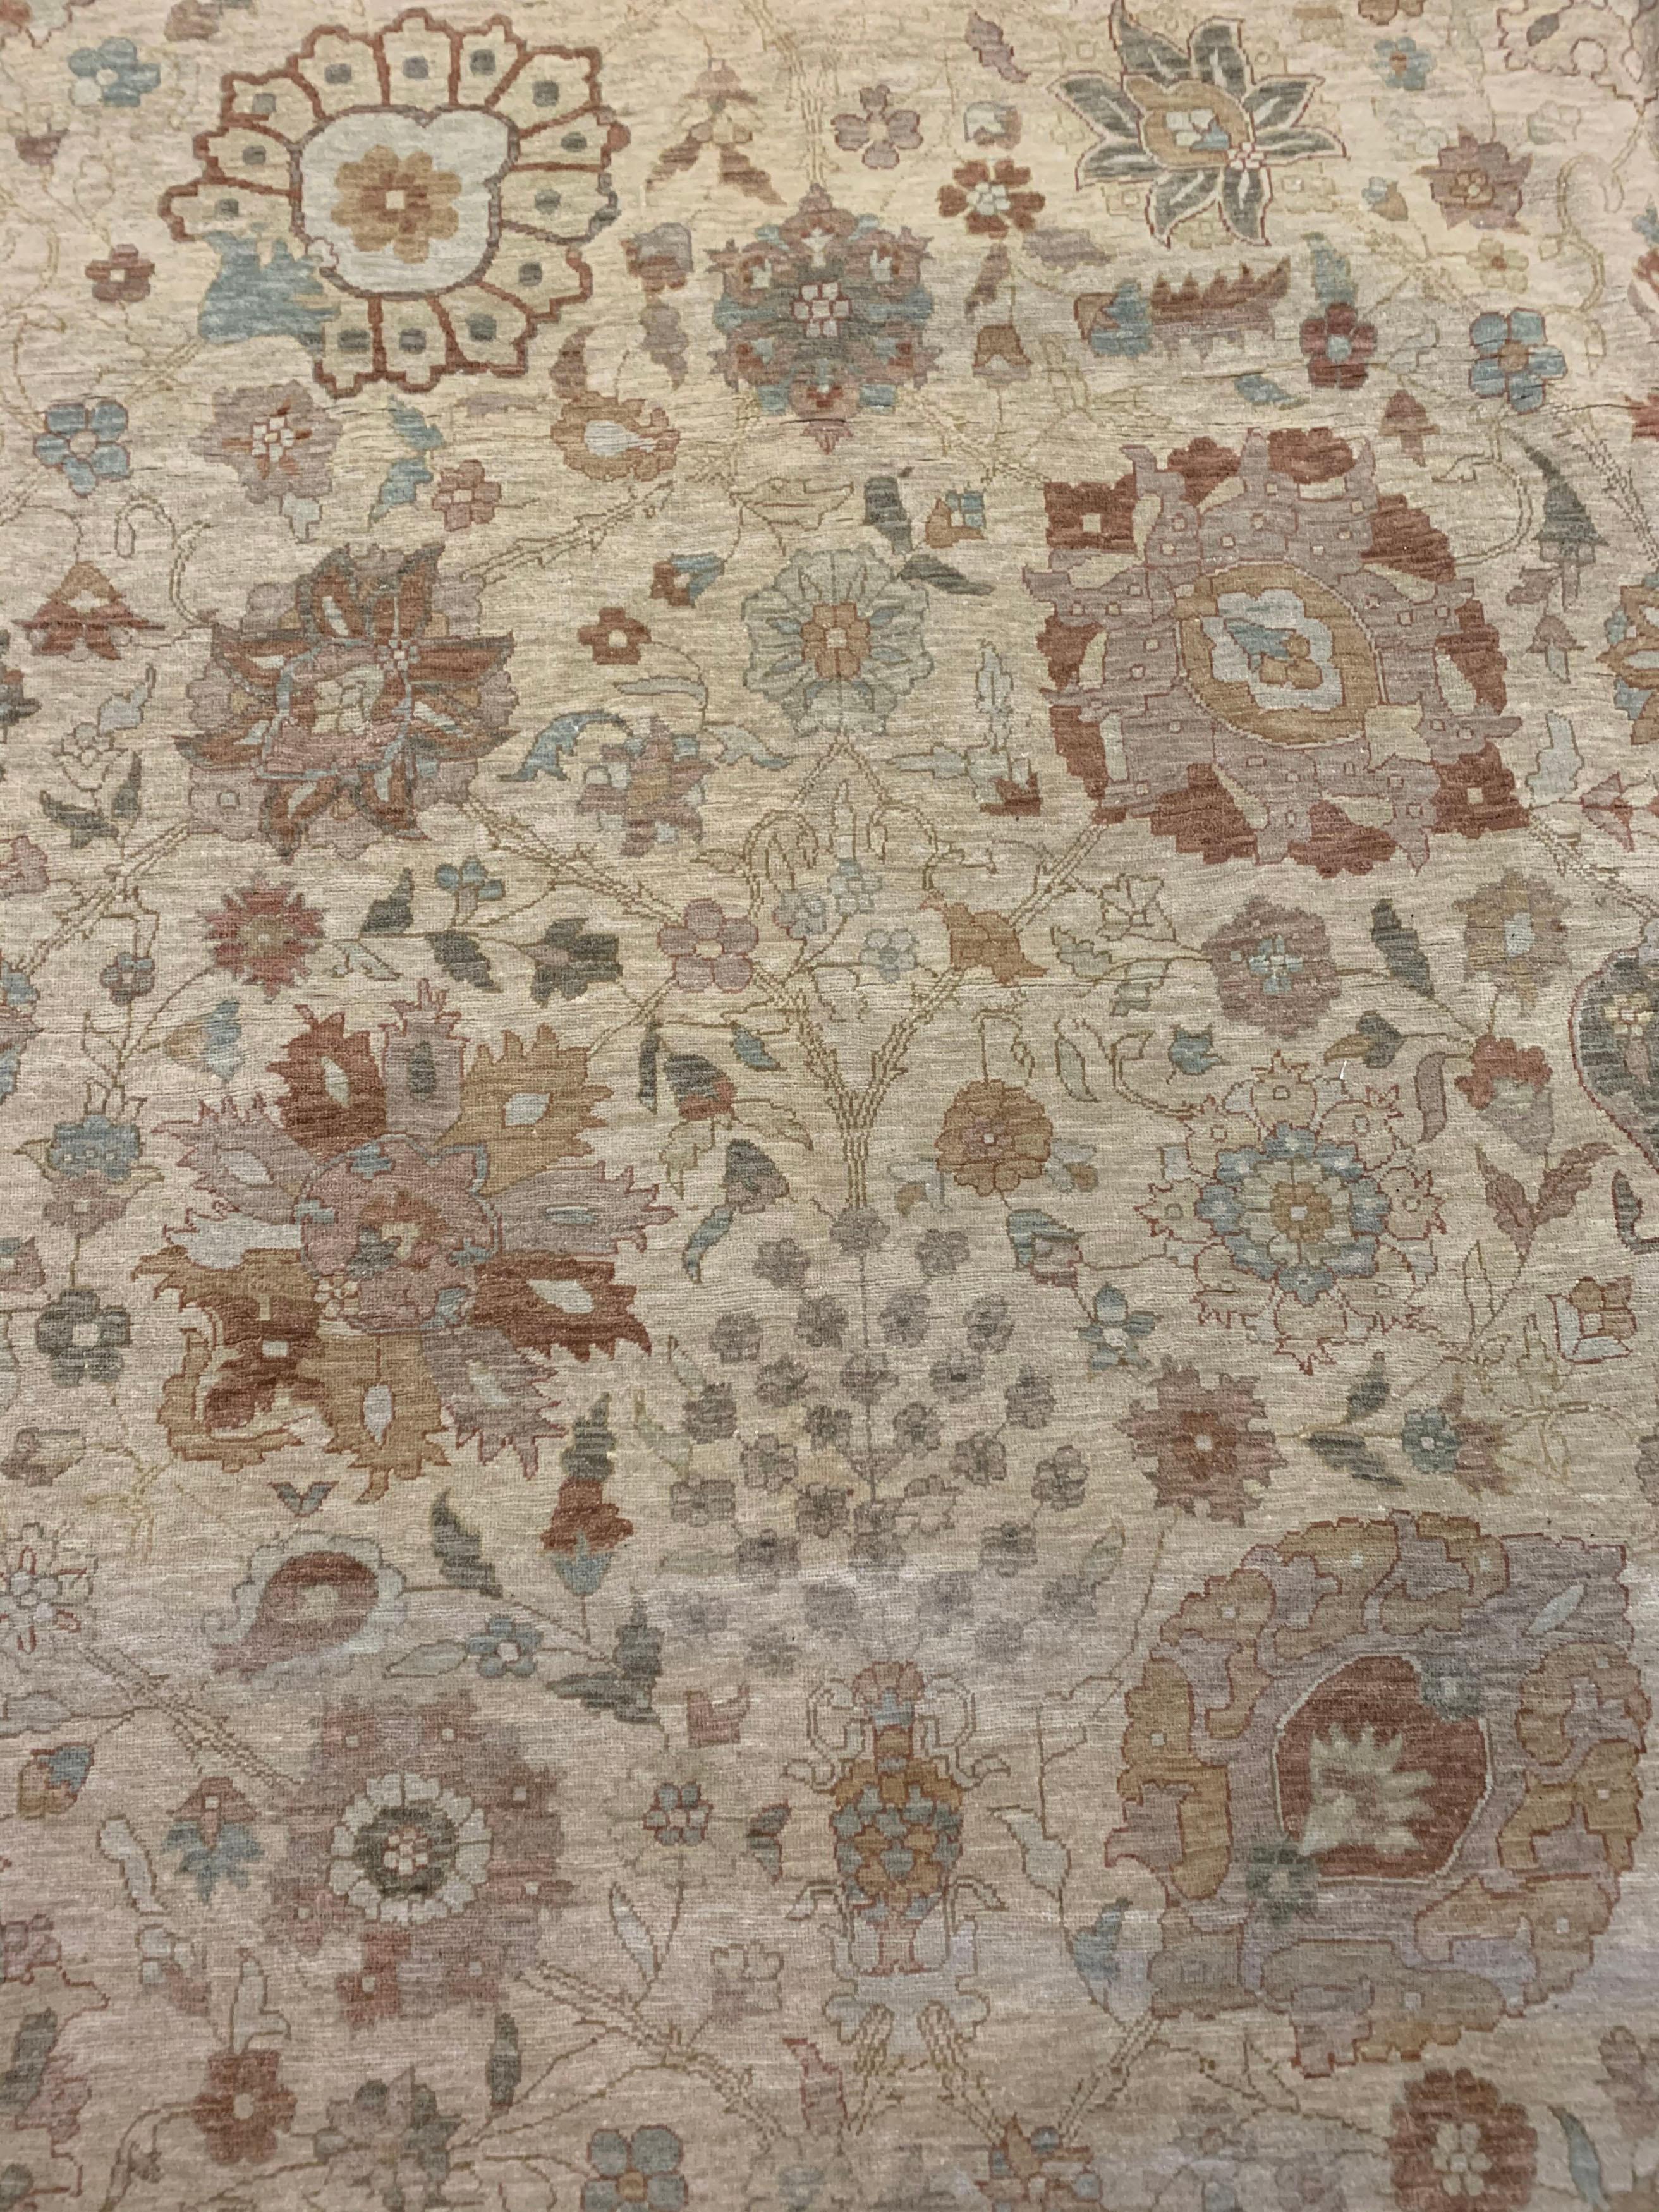 Tabriz Design Oversize Rug 13' x 23'9. A classic recreation of an antique Persian Tabriz design hand knotted in Egypt using the finest of materials. Colors: cream/dark & light taupe/blues/teals/soft green.